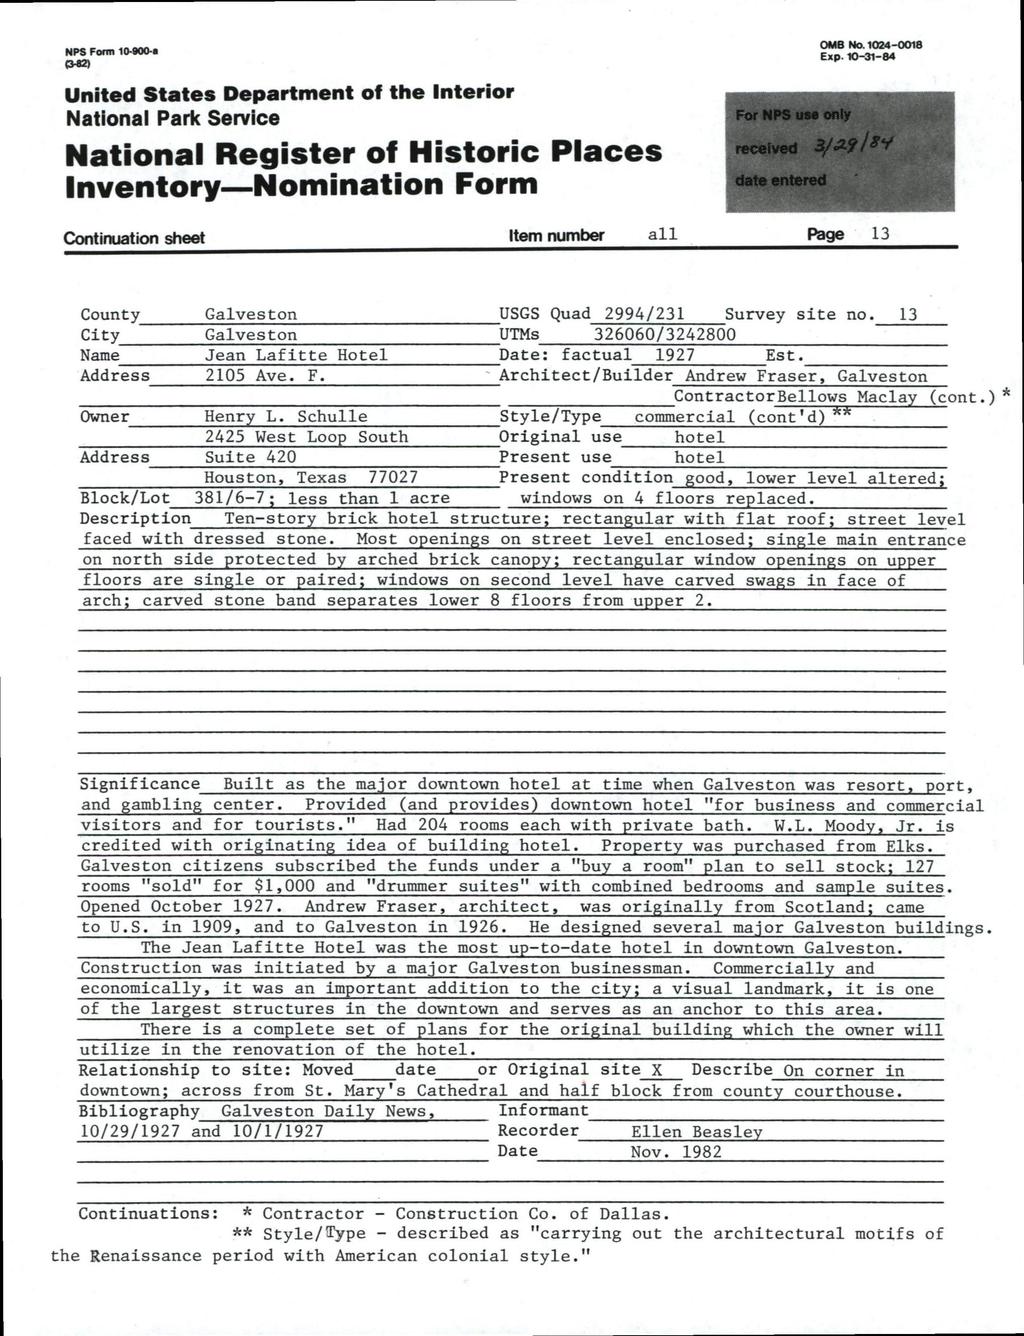 NPS Form lo-mo-a United States Department of the Interior National Park Service National Register of Historic Places Inventory Nomination Form Continuation sheet Item number all ^^^^^^^^^^^^^^^ For